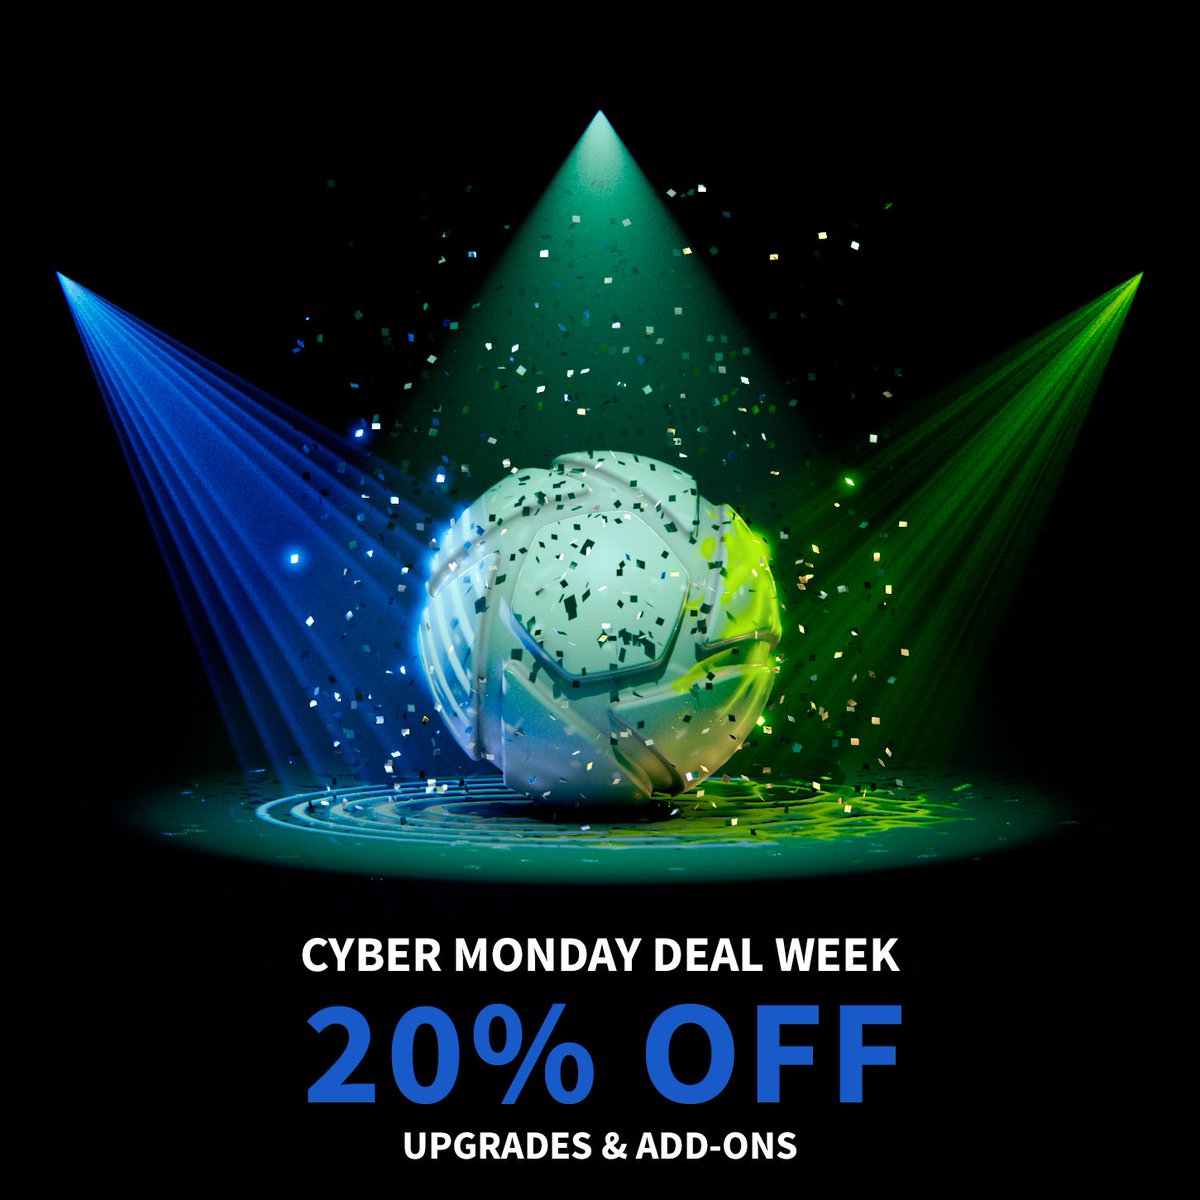 We have Cyber Monday Deal all through the week! Need a KeyShot Upgrade? Network Rendering? or KeyShotXR? Get 20% OFF with code CMW2018 bit.ly/2AoI2PY #cybermonday #keyshot #3drendering